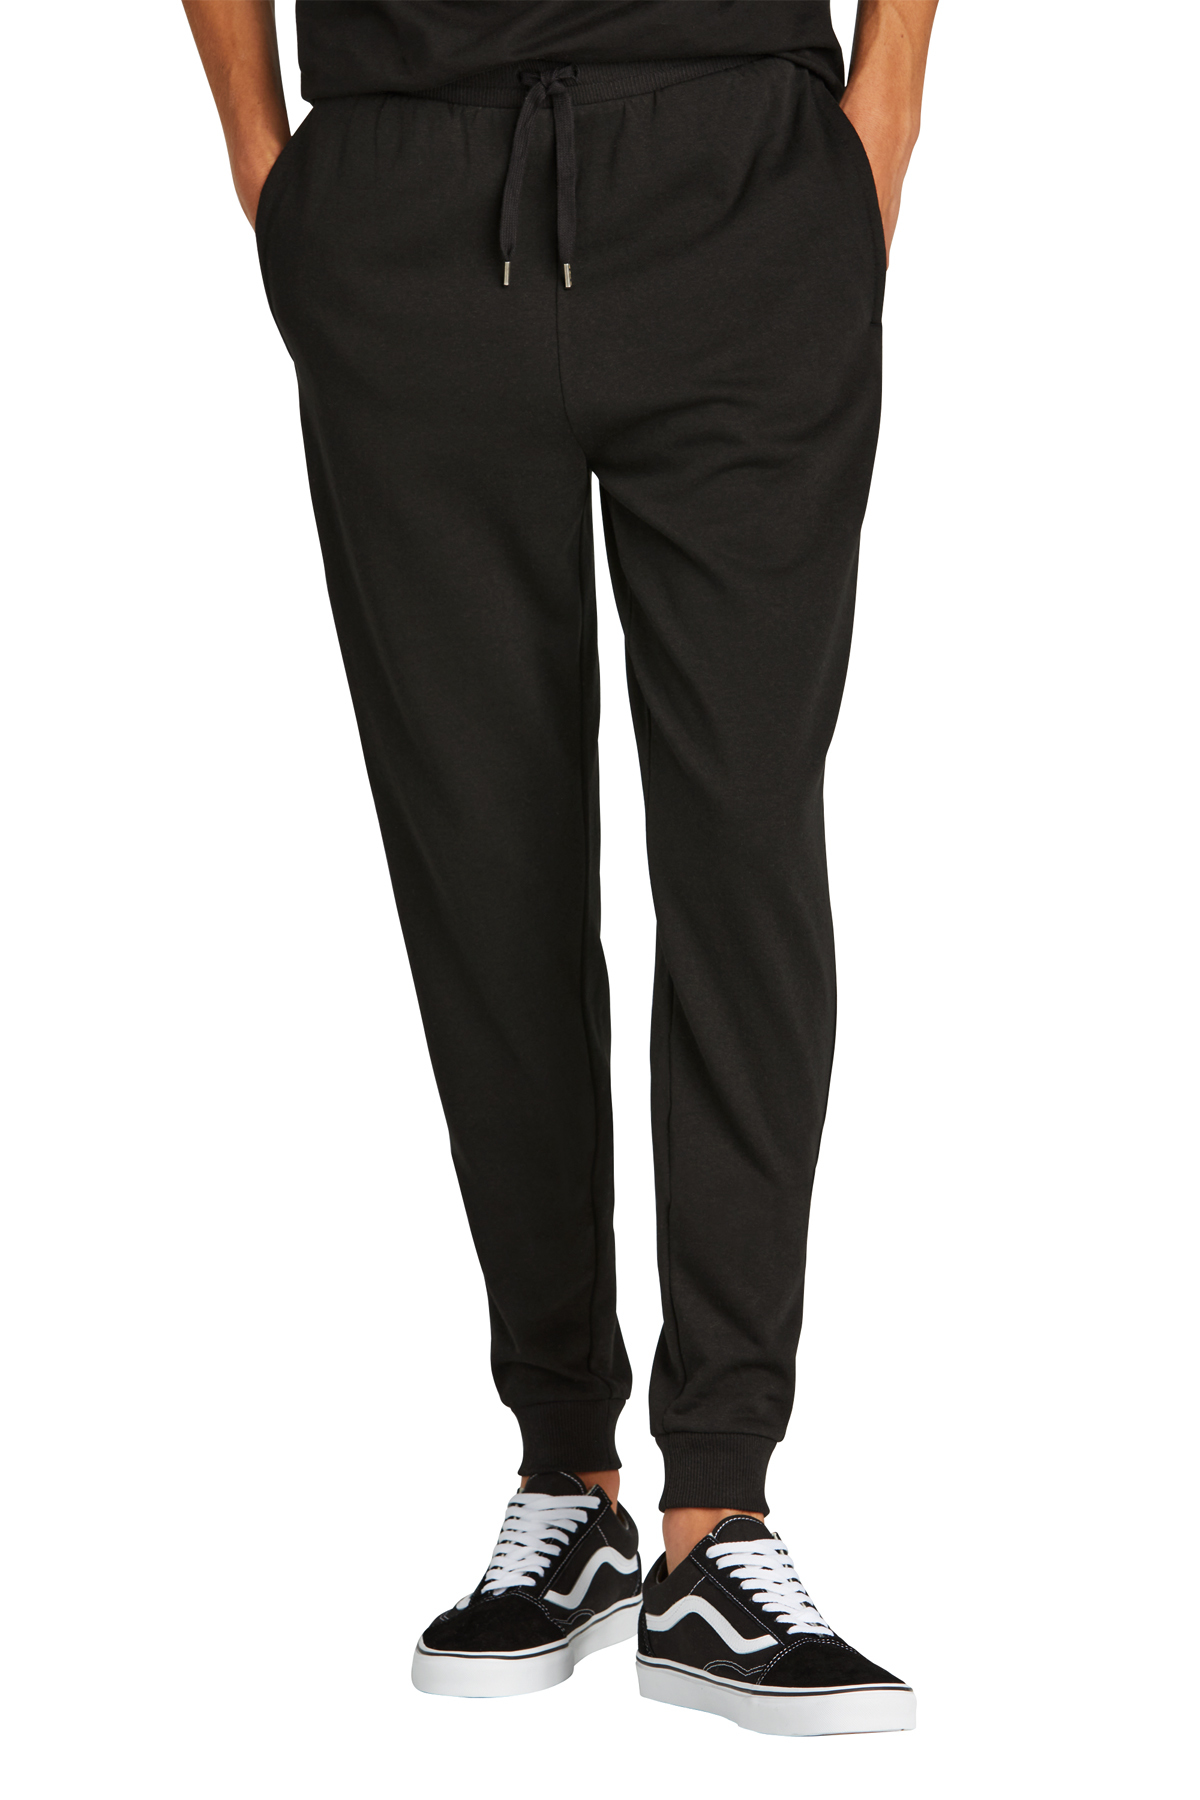 District Perfect Tri Fleece Jogger | Product | District